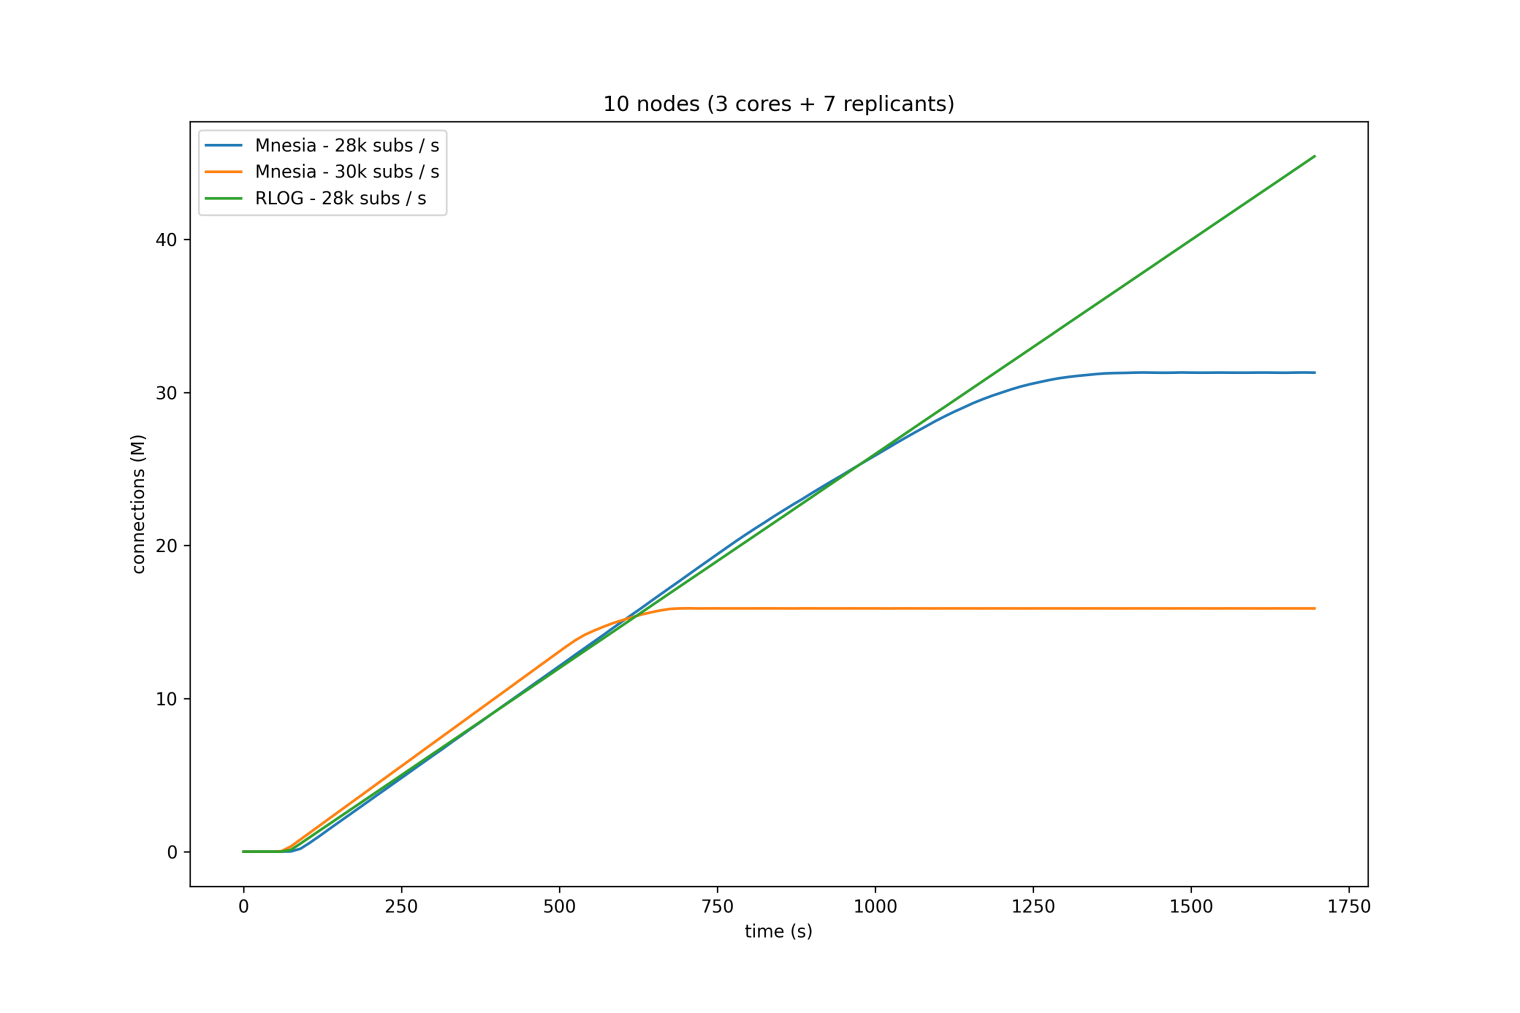 Mria using RLOG can perform better under higher connection rates than the older Mnesia backend